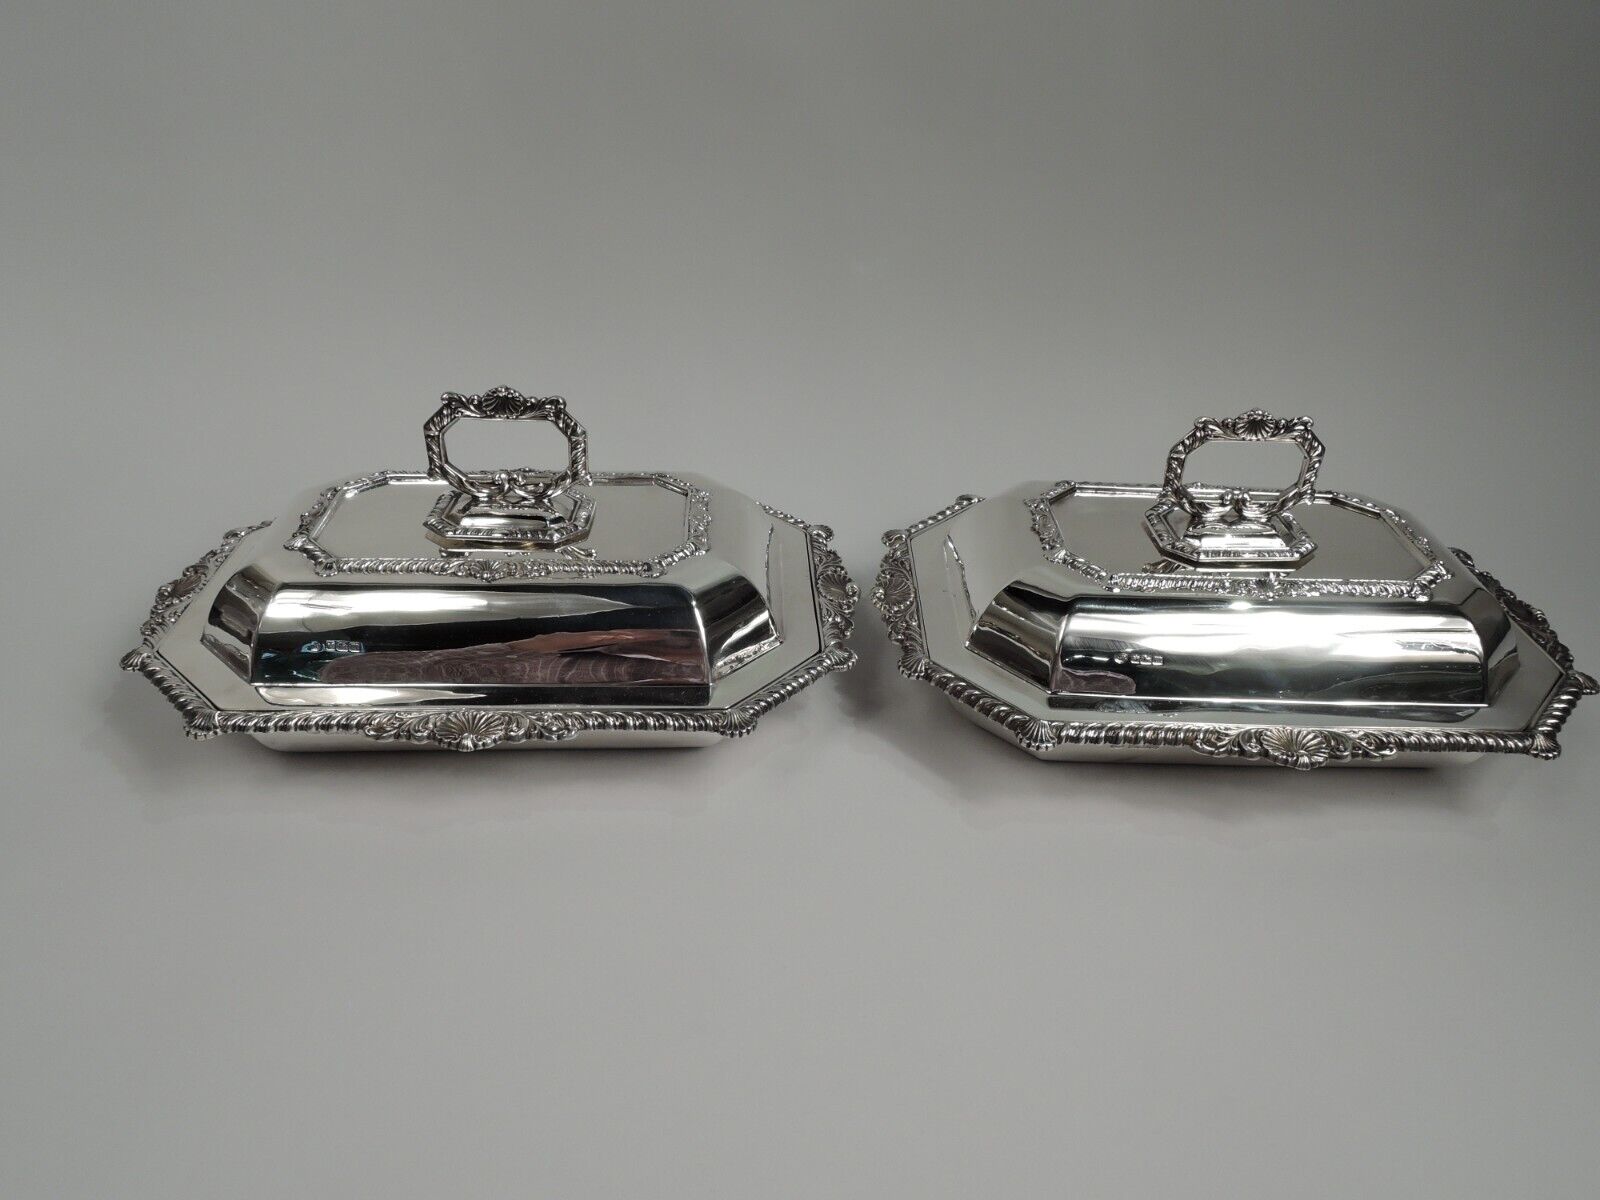 Edwardian Serving Dishes Antique Georgian Covered Bowls English Sterling Silver  Round